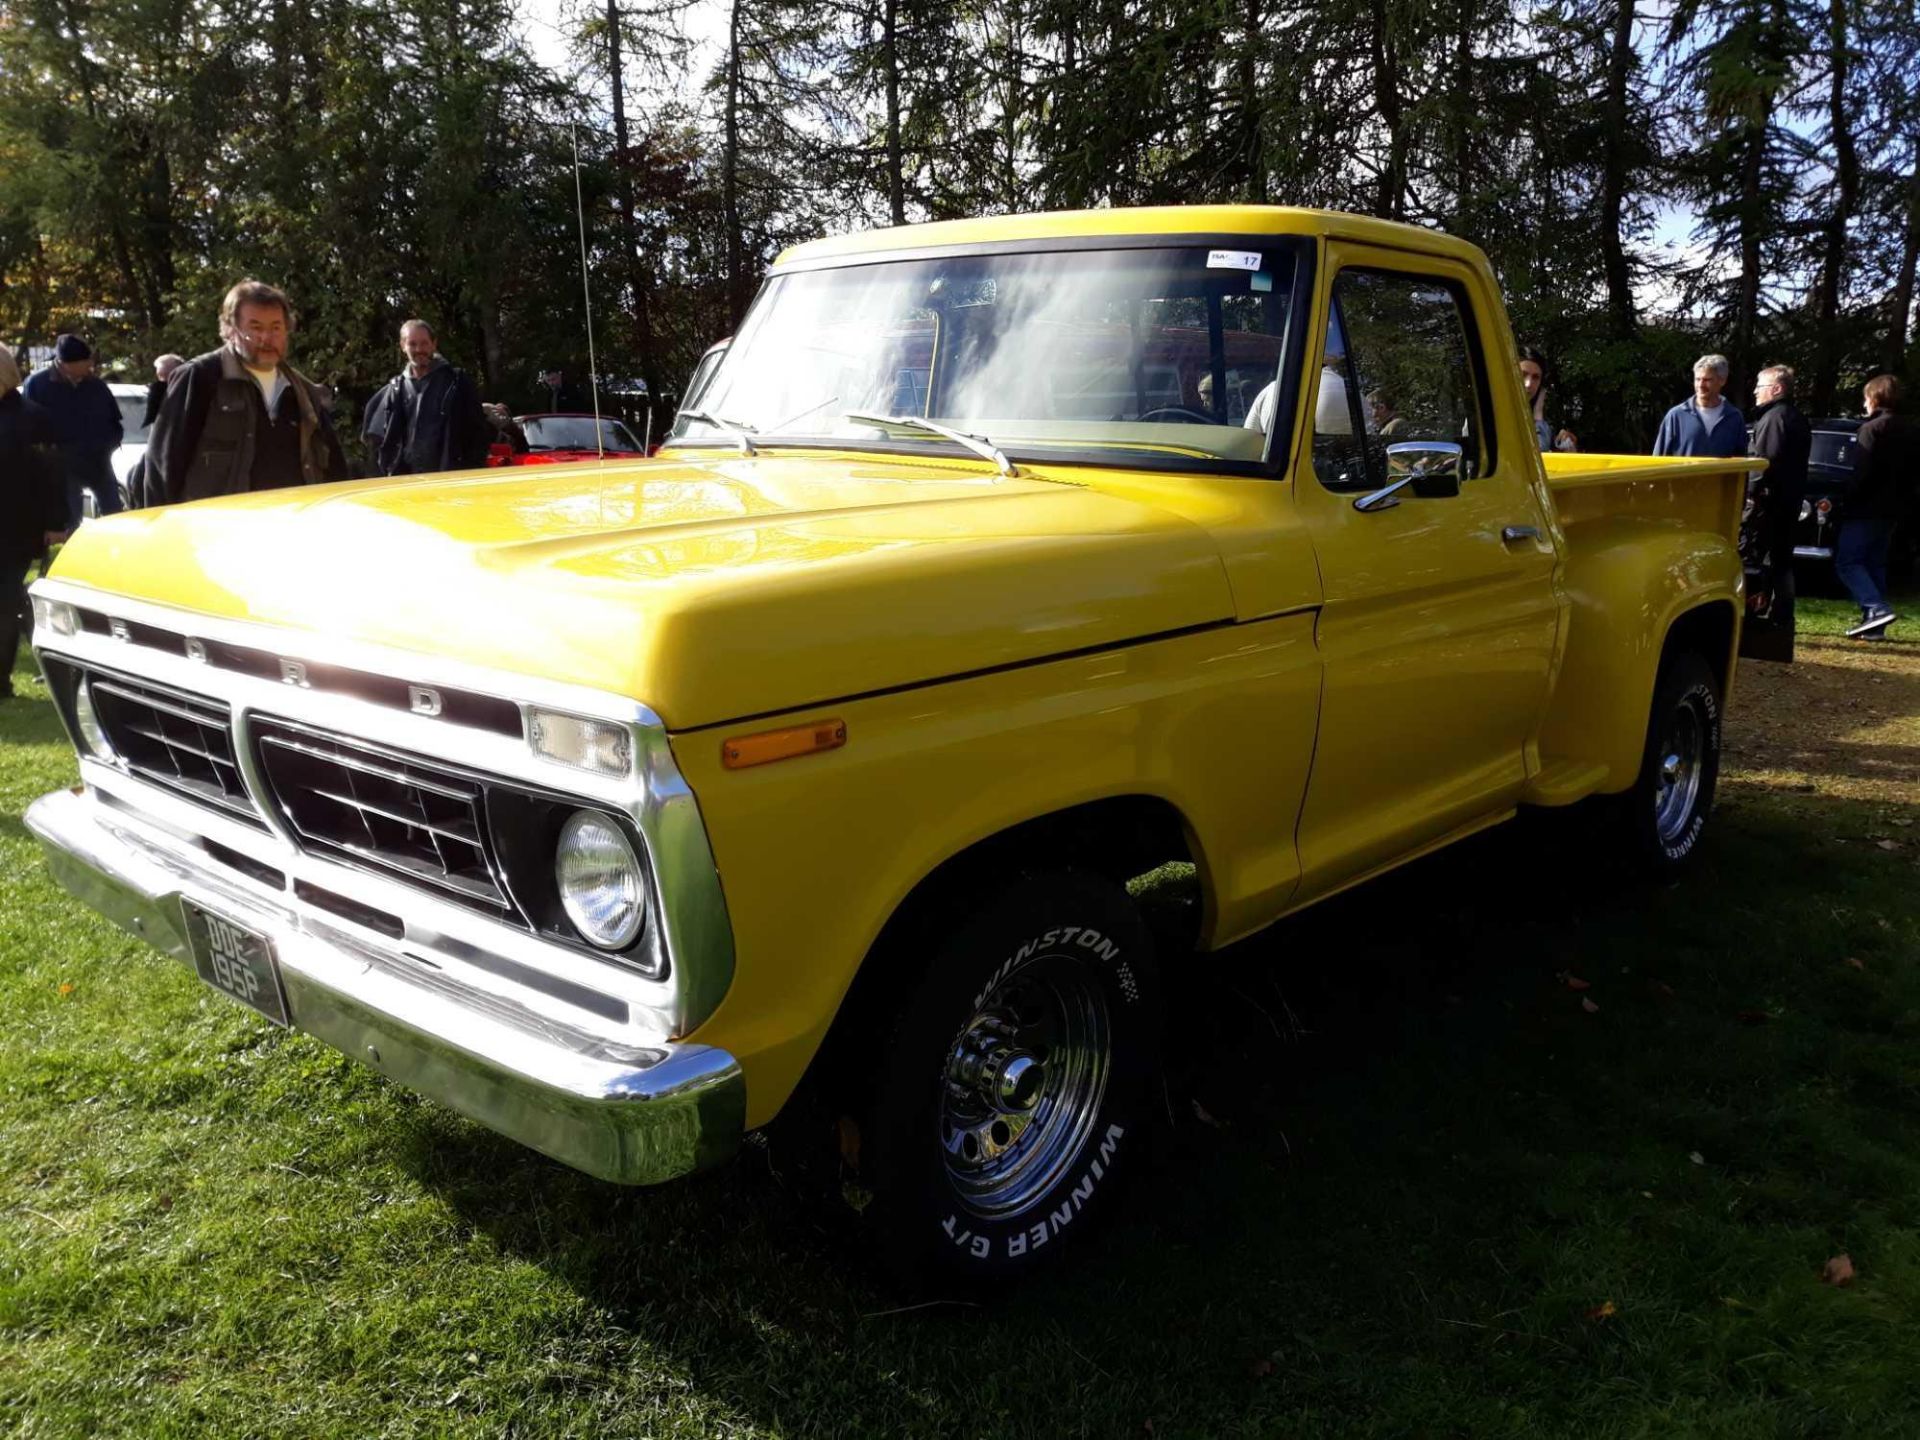 Ford F150 - 4700cc 4x4 - Image 2 of 5